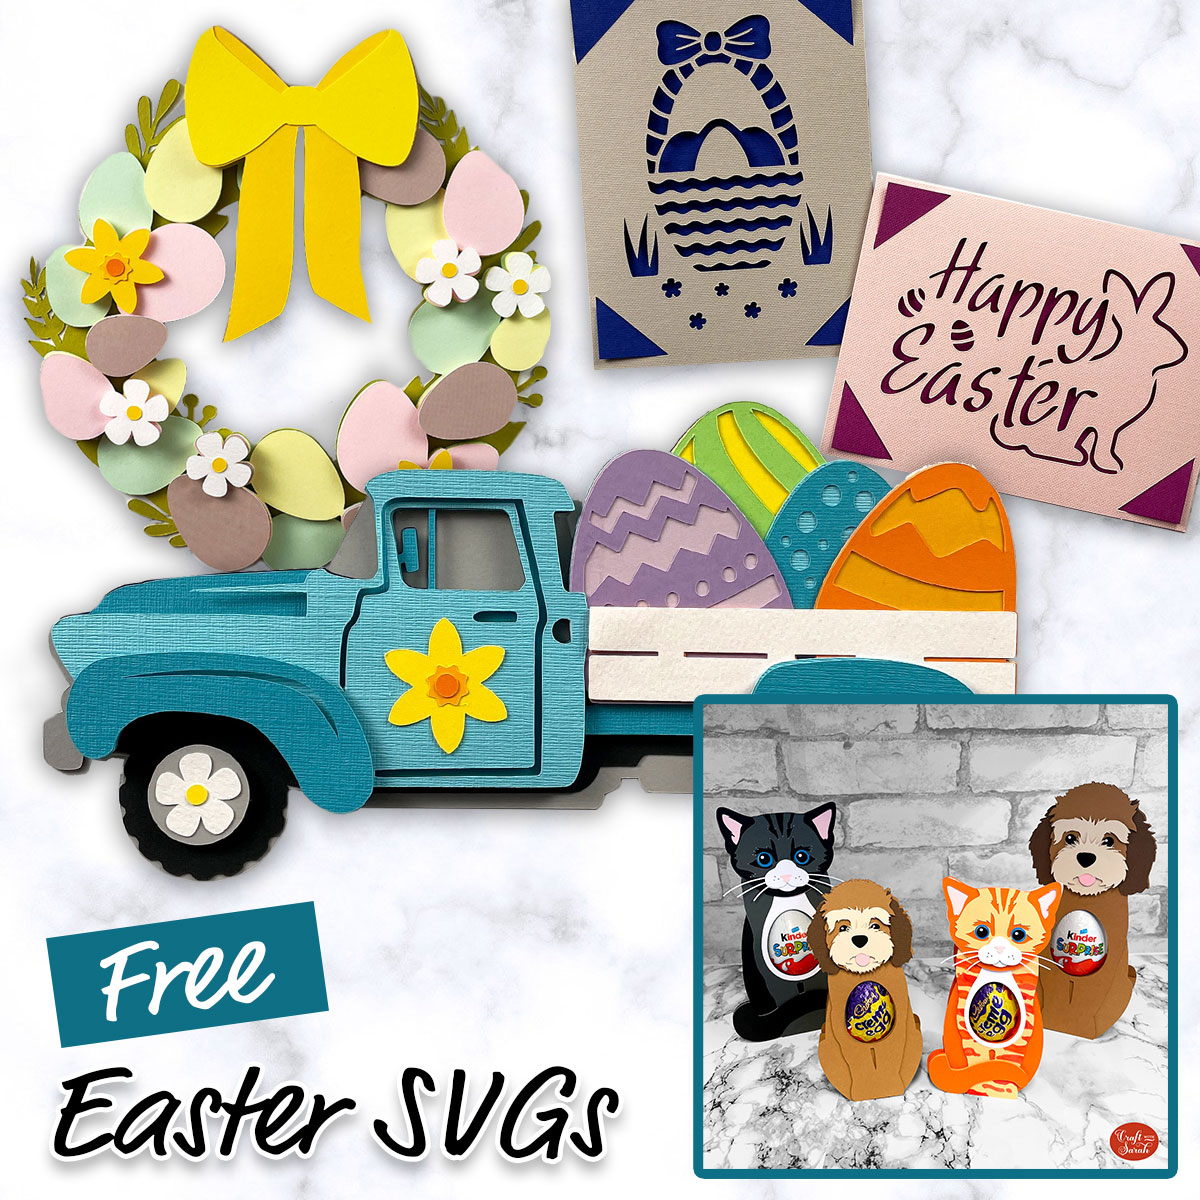 Free Easter SVG Files for Cricut 🥰 Layered Easter SVGS & More